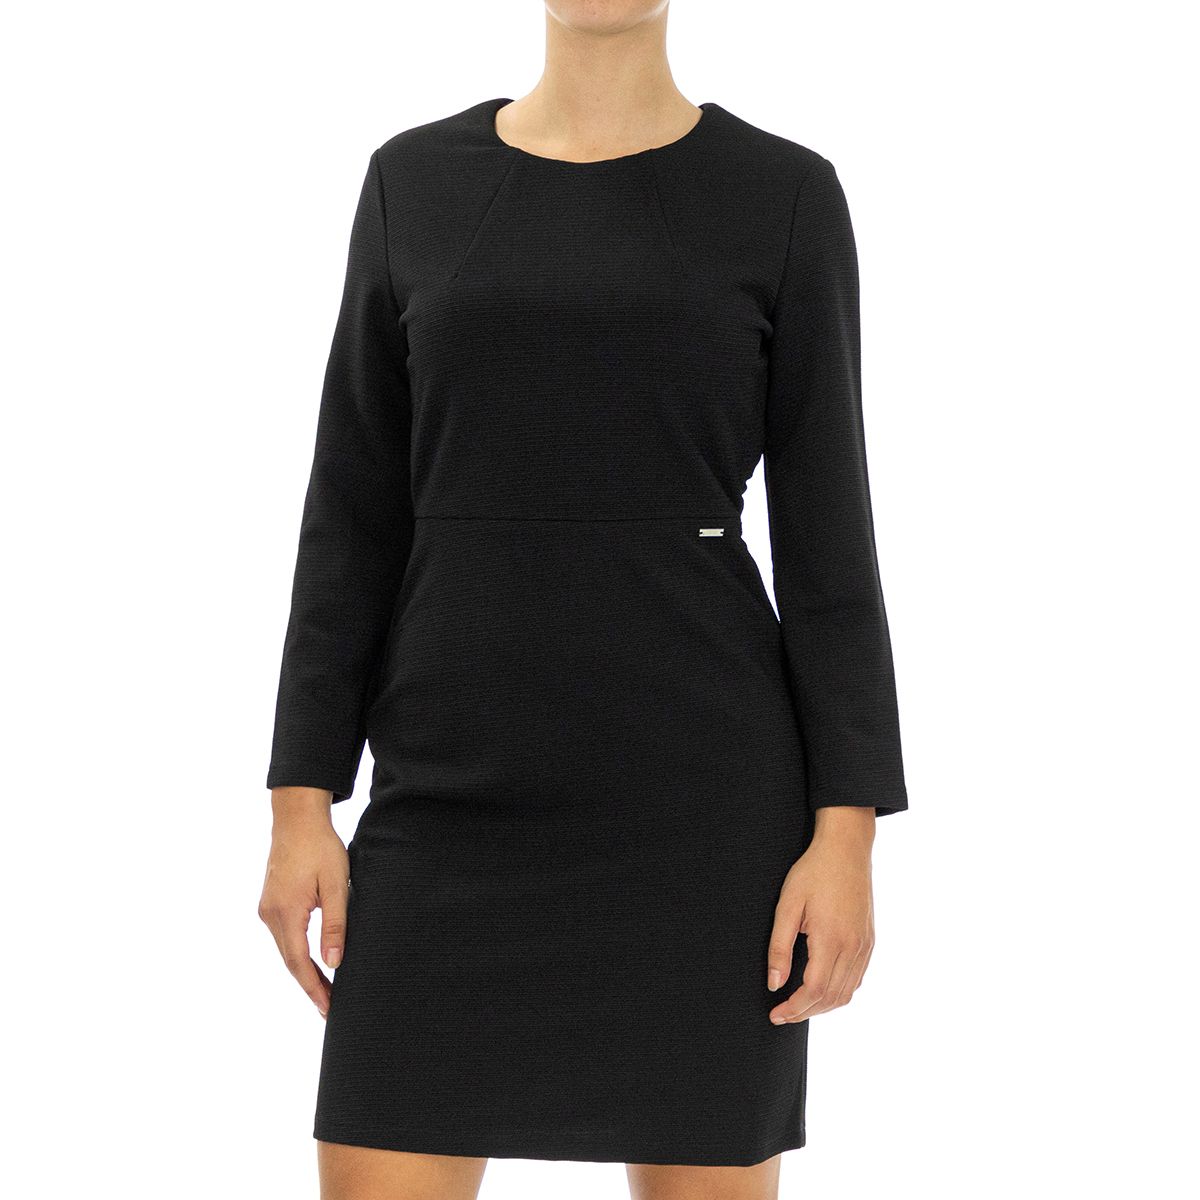 Armani Exchange 6ZYA86YJV5Z-1200-L Every woman should have a black dress like this one, perfect for any formal occasion.